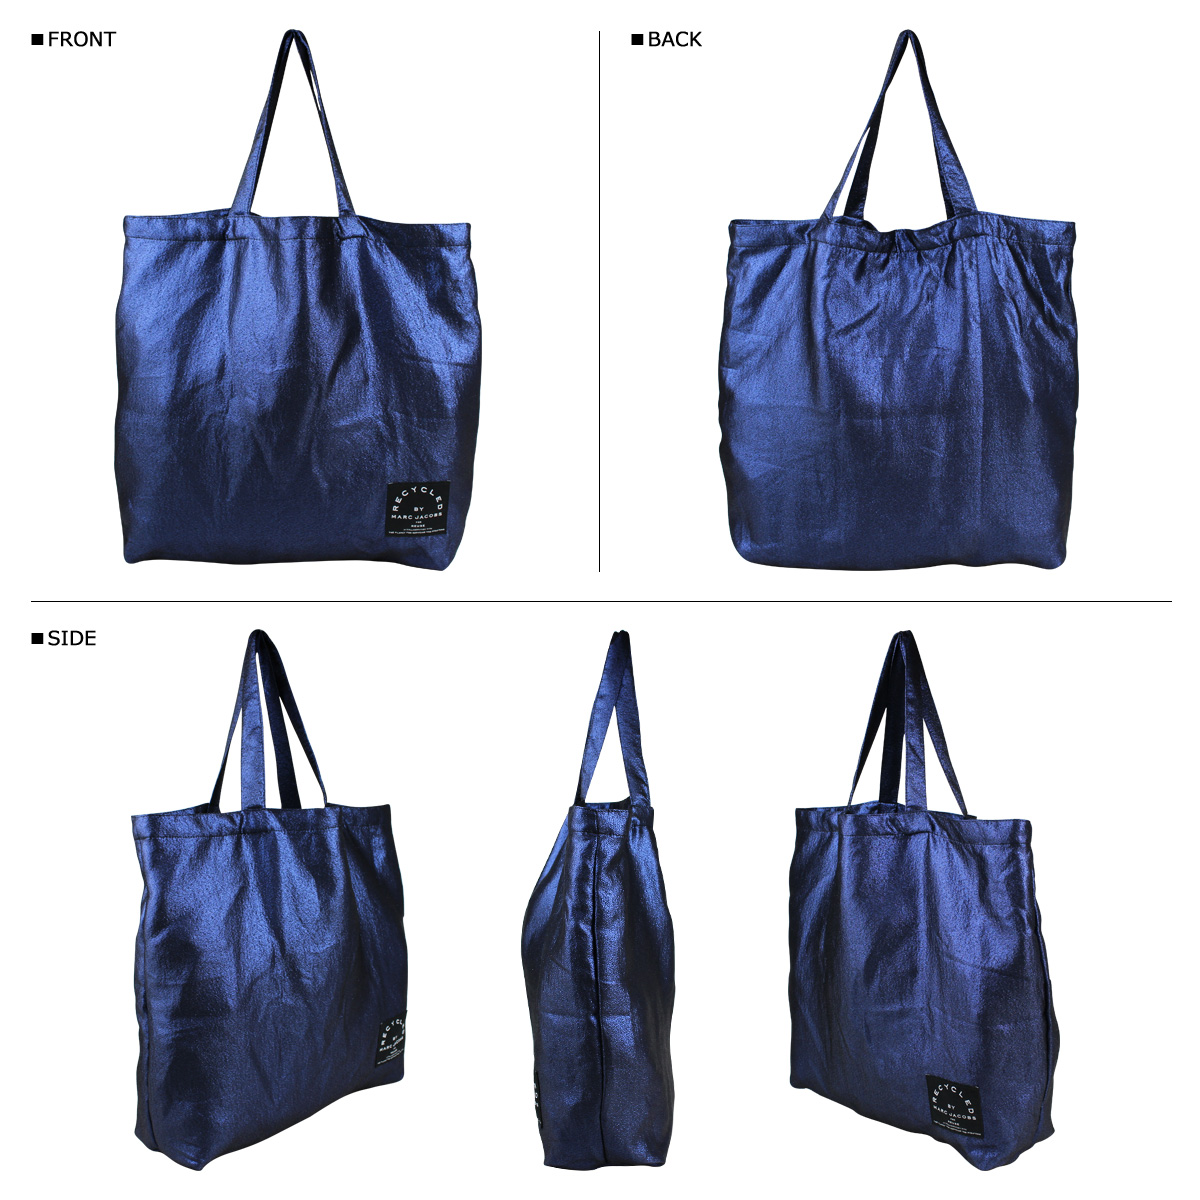 ALLSPORTS: MARC BY MARC JACOBS Marc by Marc Jacobs bag Tote S0000280 TOTE RECYCLE men women [8/2 ...